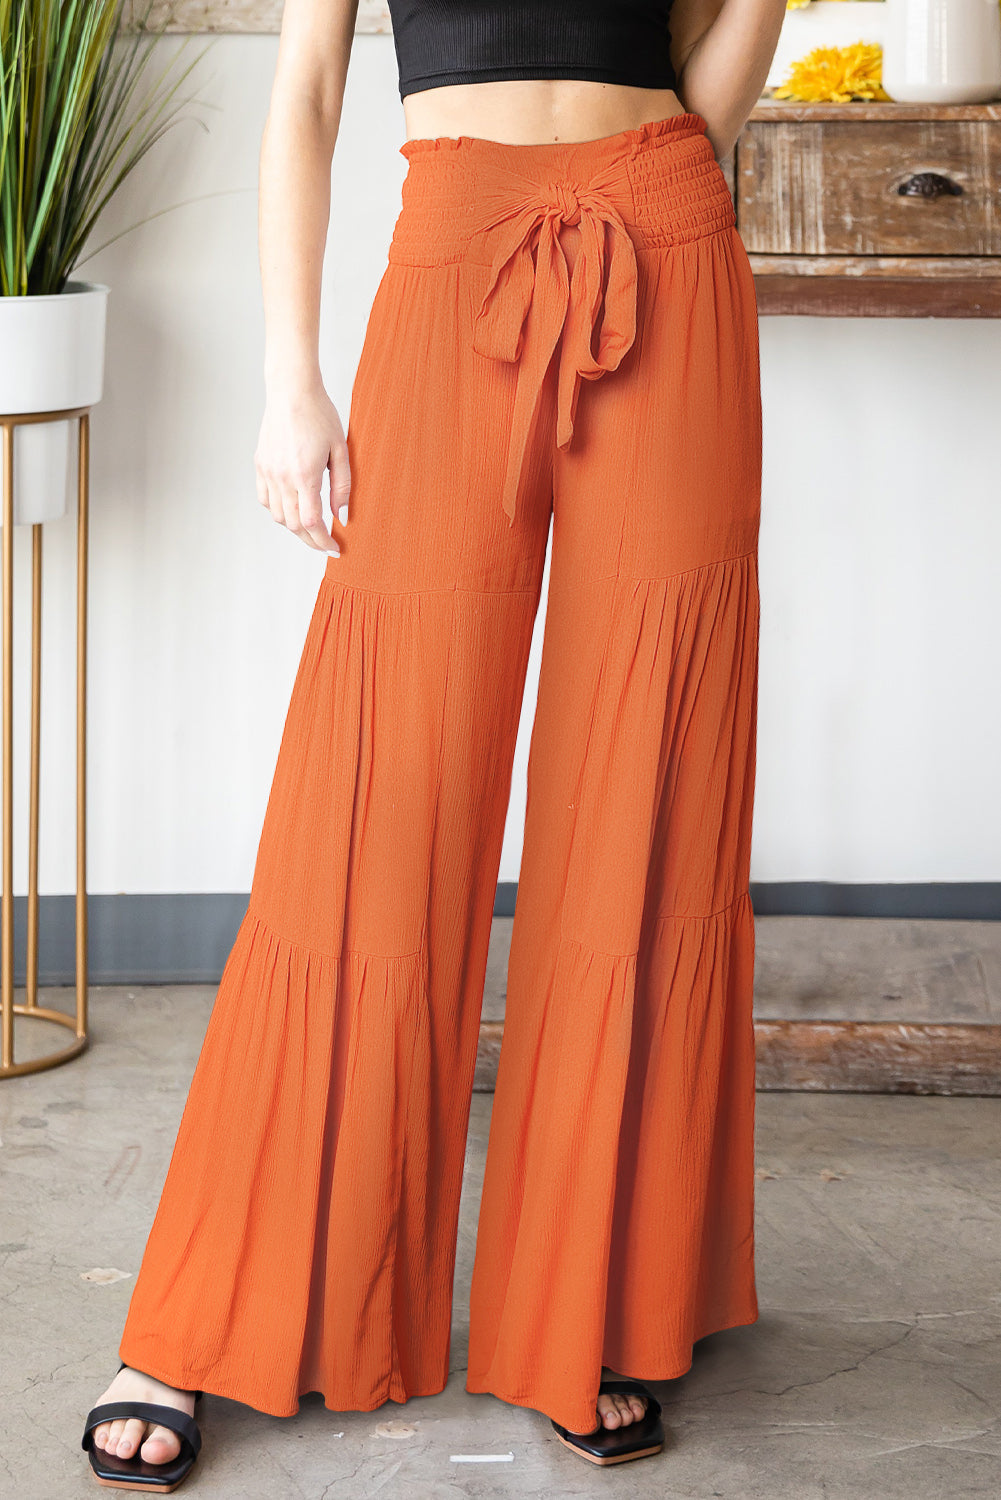 Tied Smocked Waist Tiered Culottes - Orange / S - Bottoms - Pants - 1 - 2024